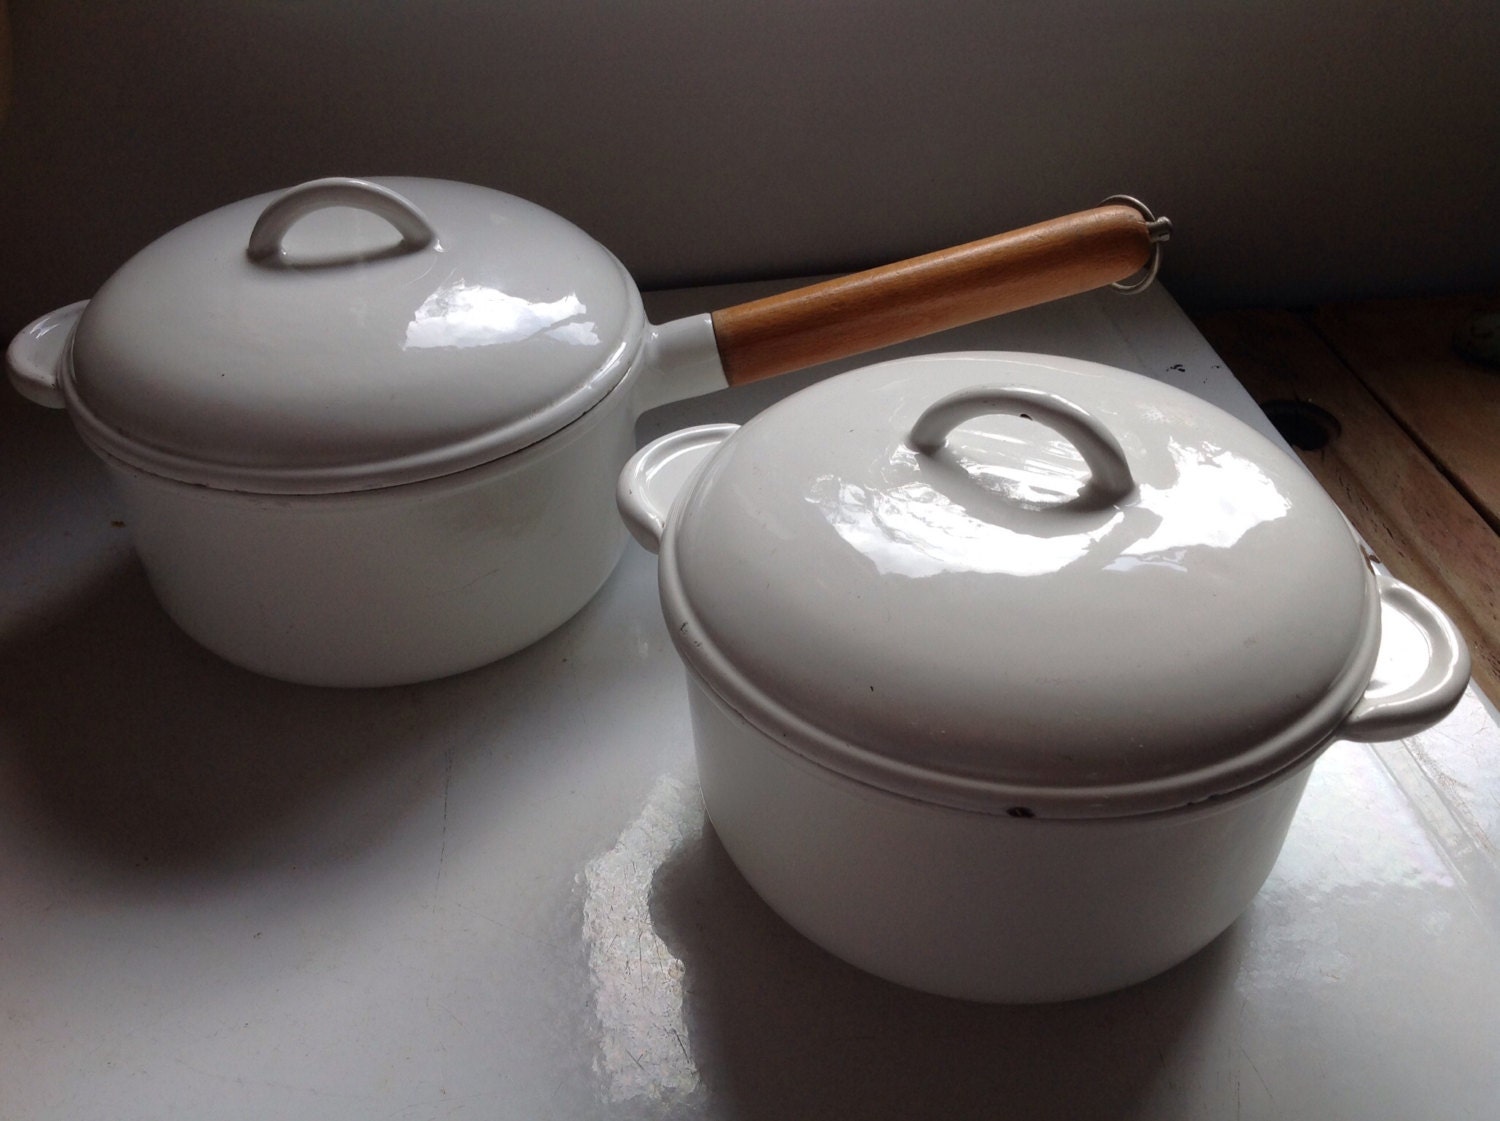 Vintage white cast iron cooking pair casserole and saucepan - Onmykitchentable